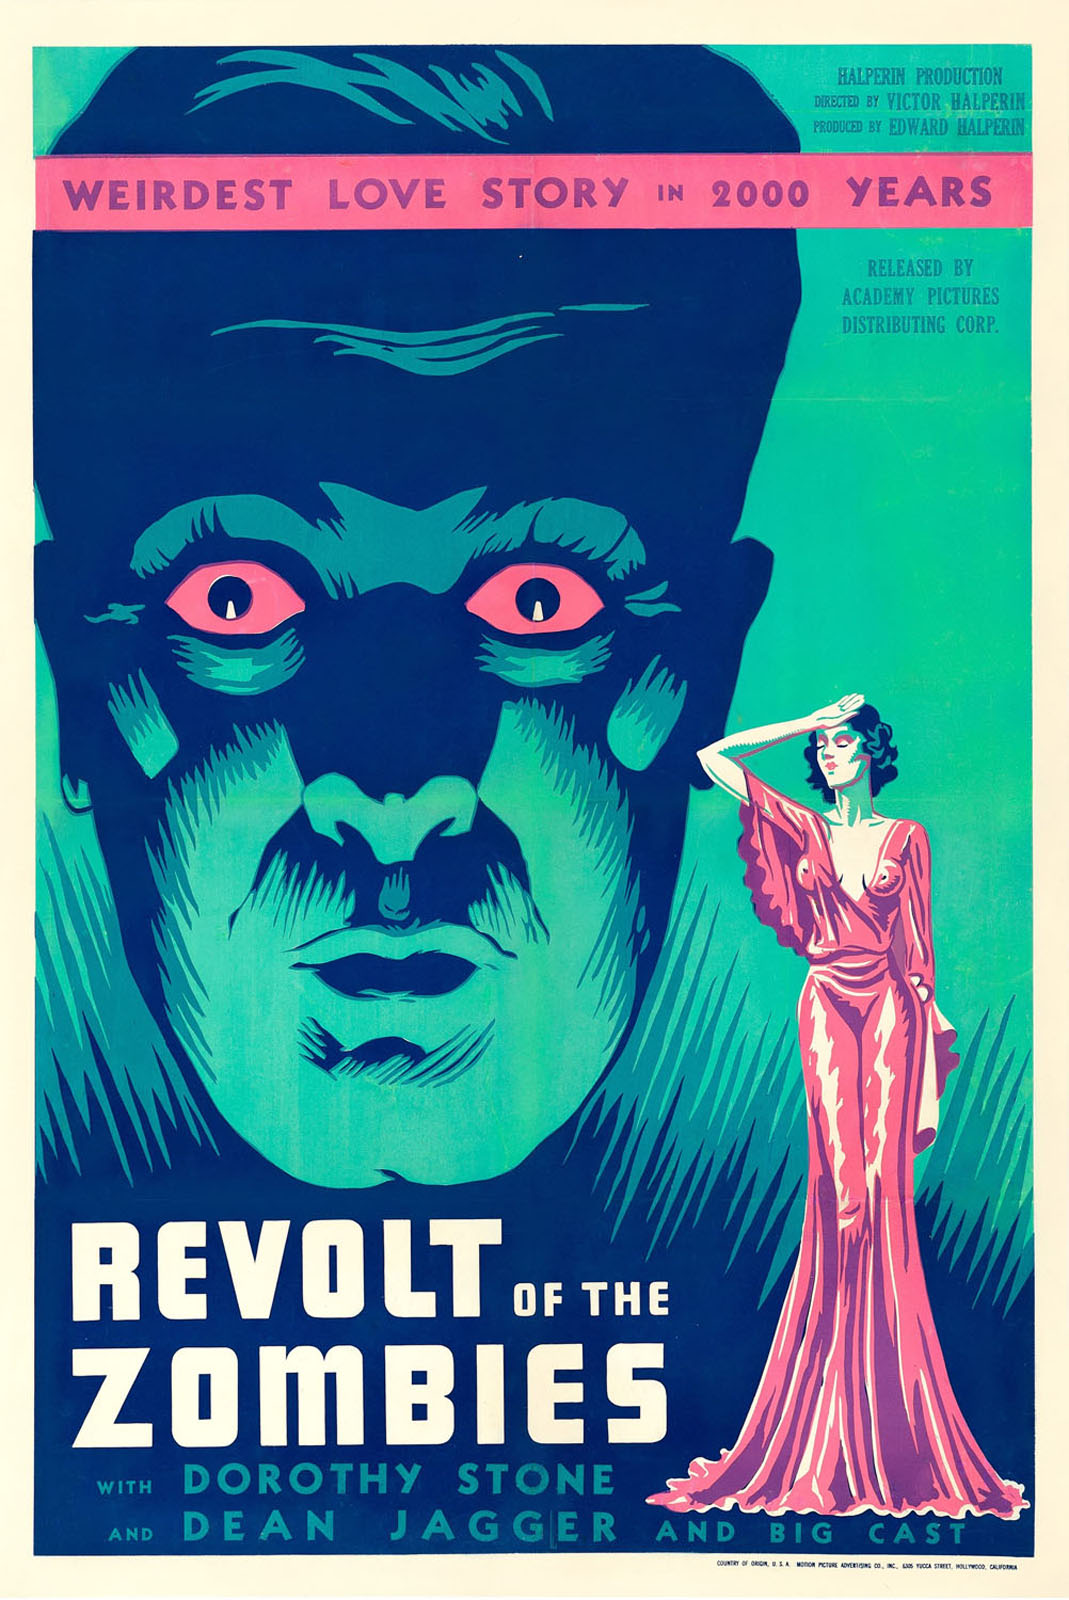 REVOLT OF THE ZOMBIES